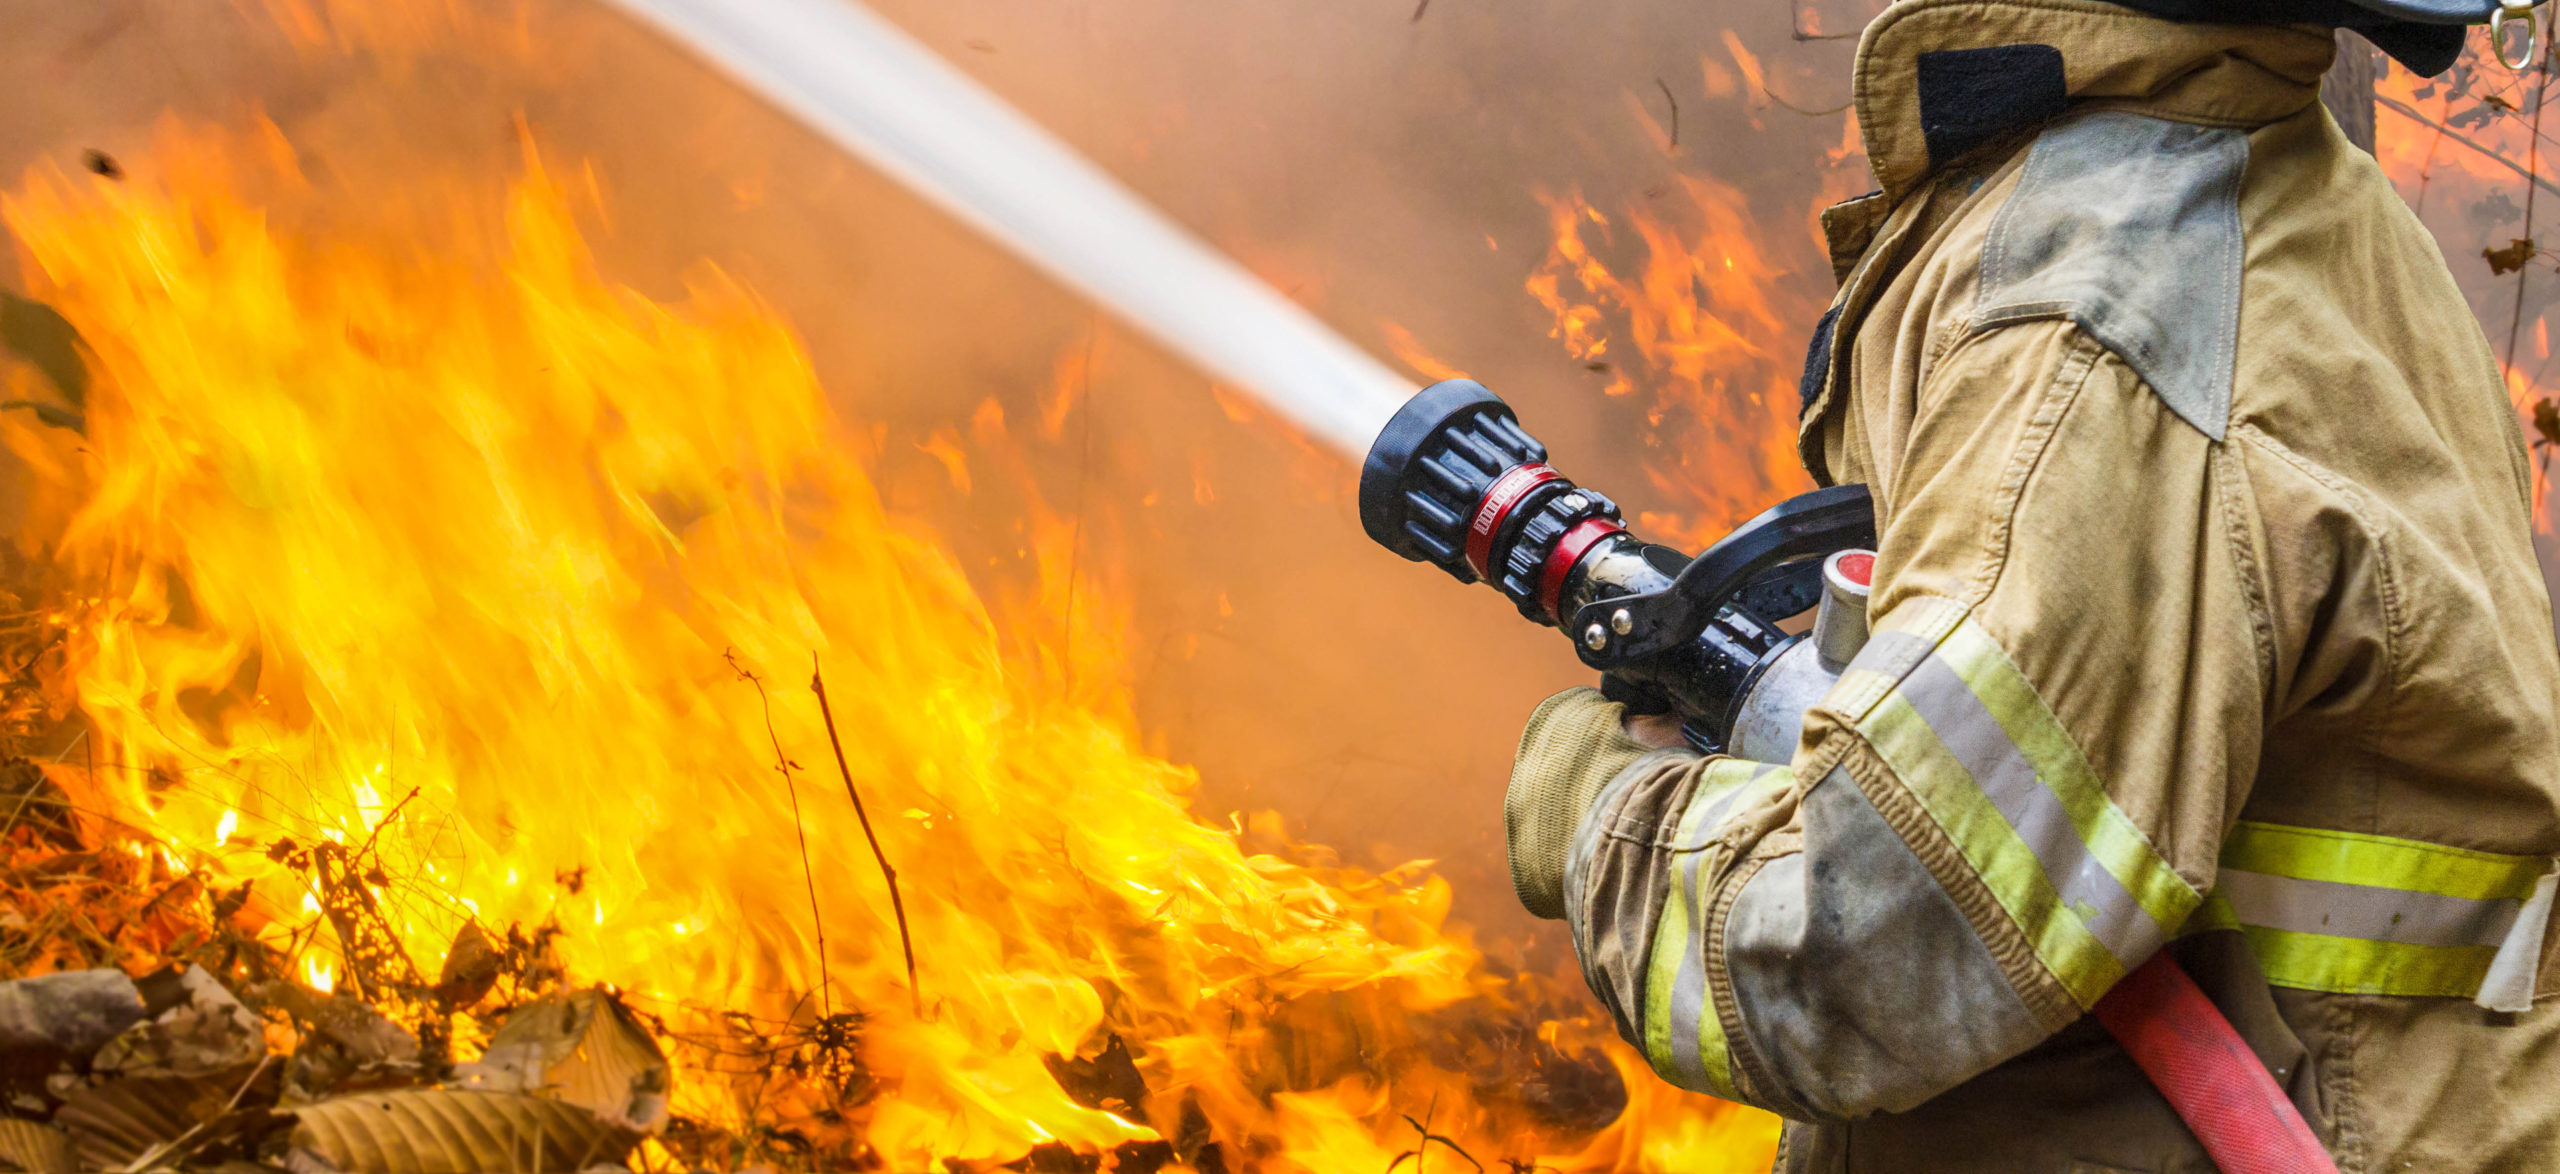 Firefighters Prayer of the Day - Today's Prayer of the Day focuses on the women and women battling fires everywhere. #Firefighters #PrayeroftheDay